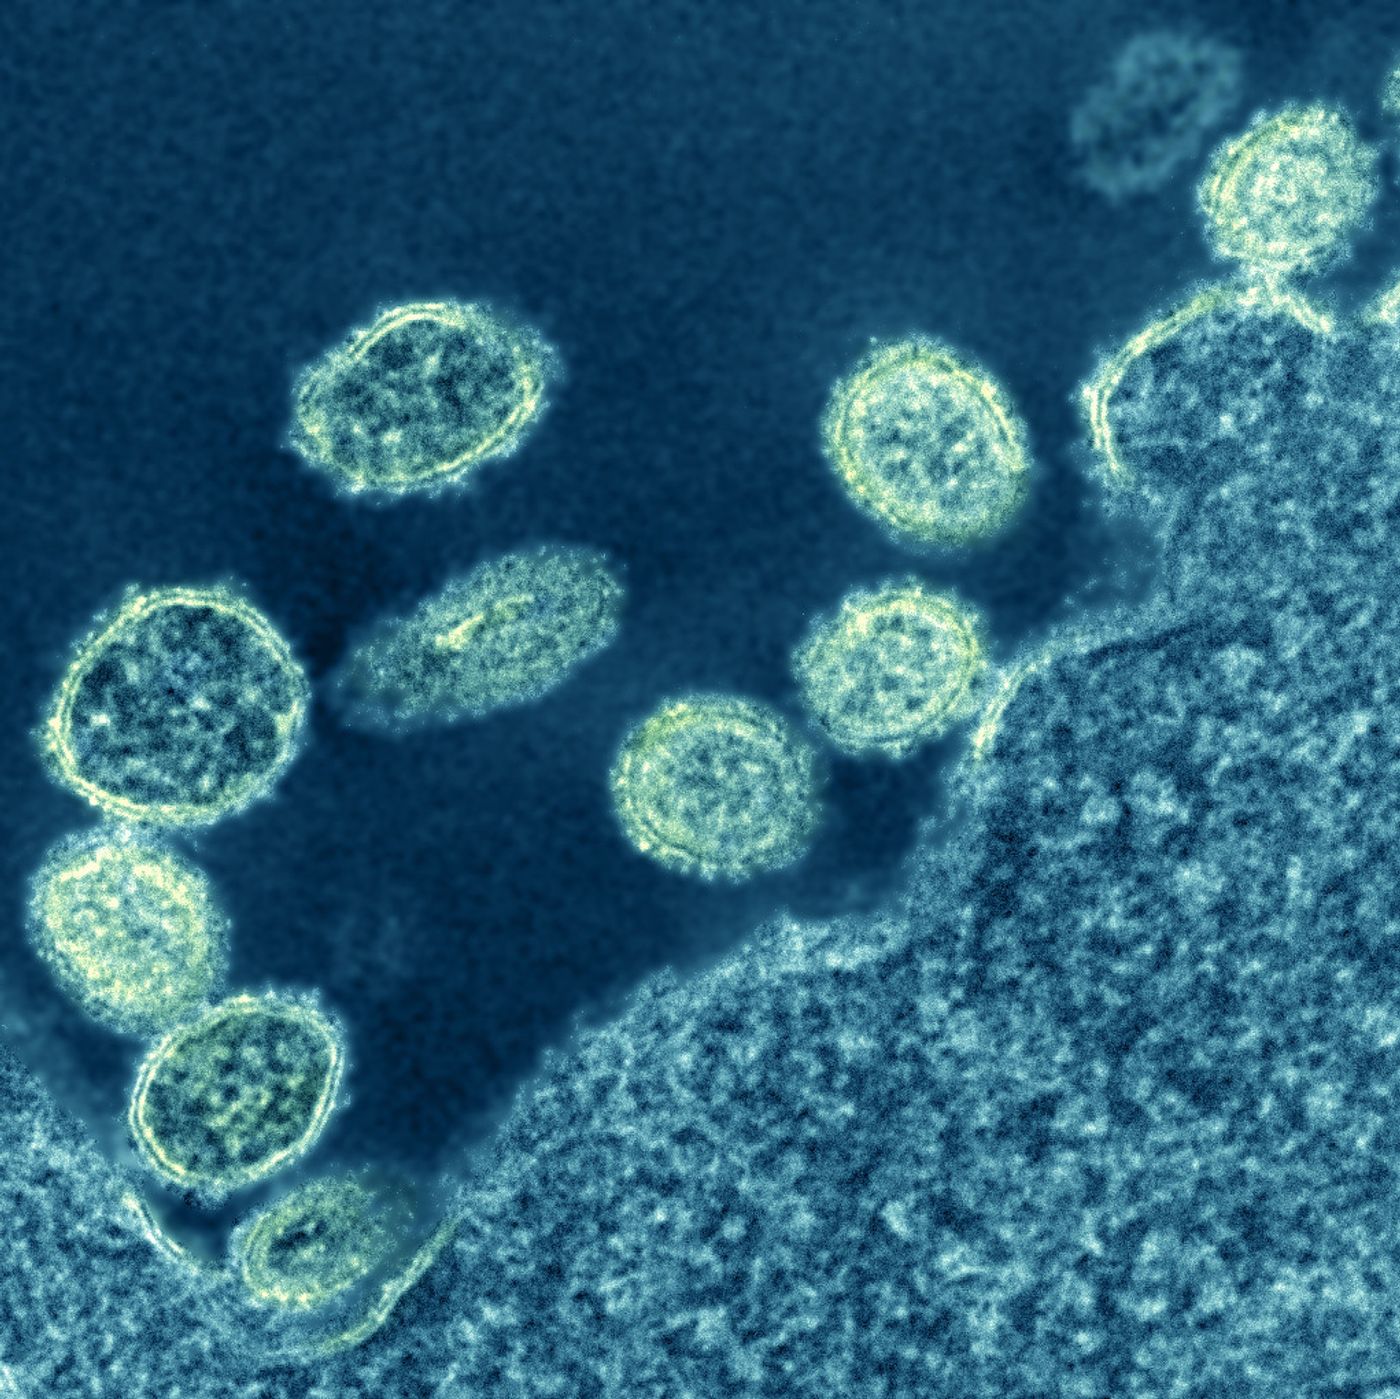 Electron micrograph of 1918 H1N1 influenza virus particles near a cell. / Credit: NIAID